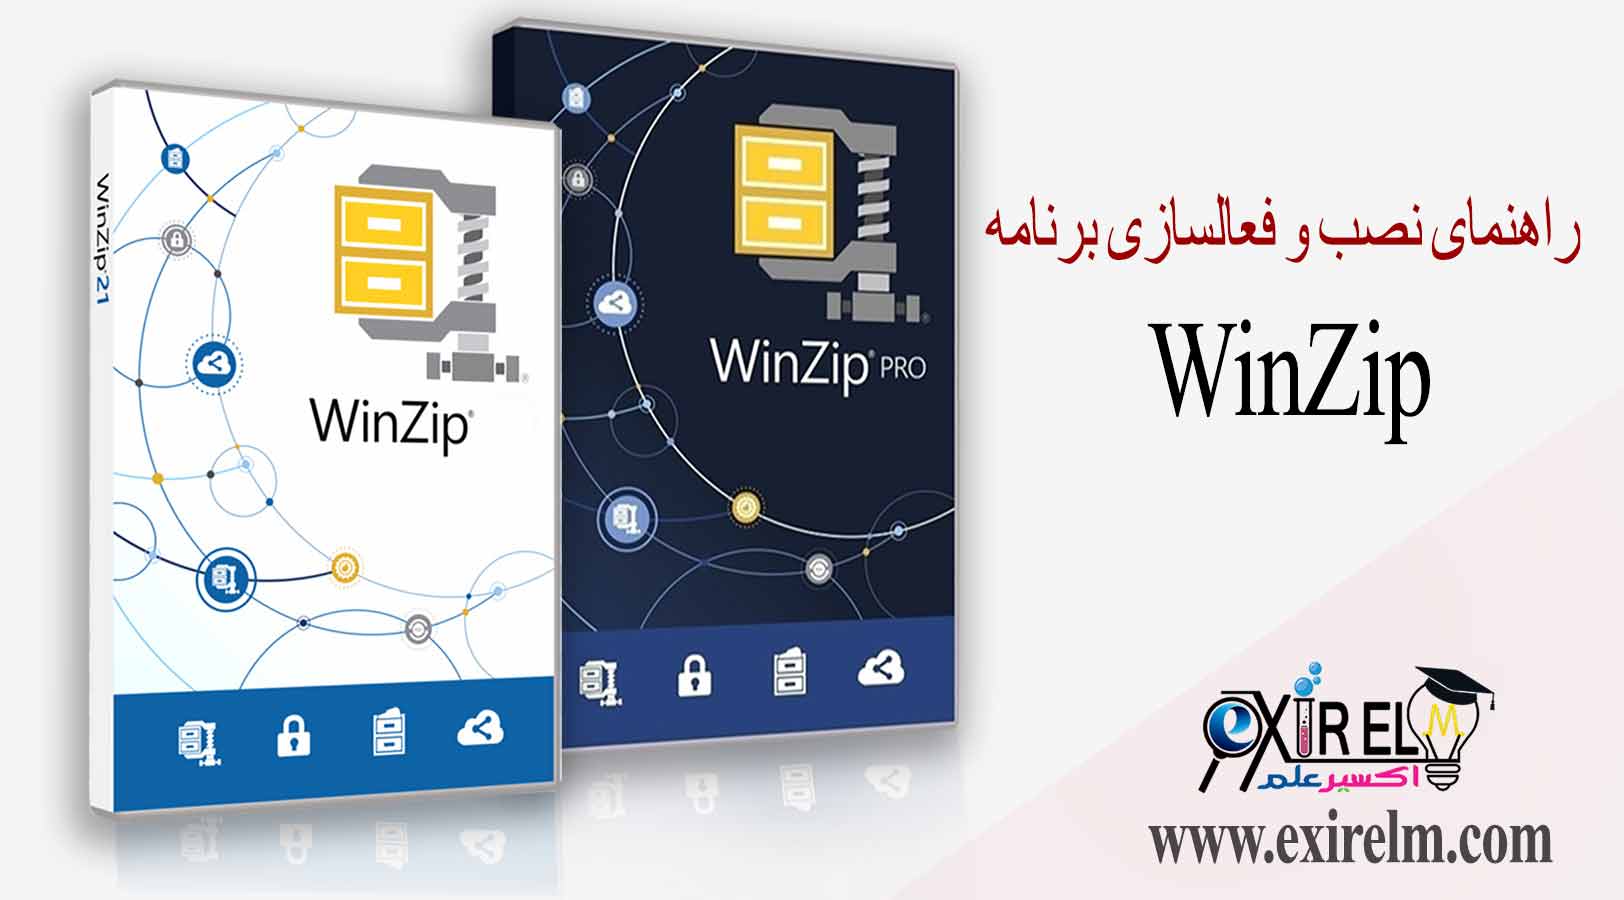 WinZip Pro 28.0.15640 download the new